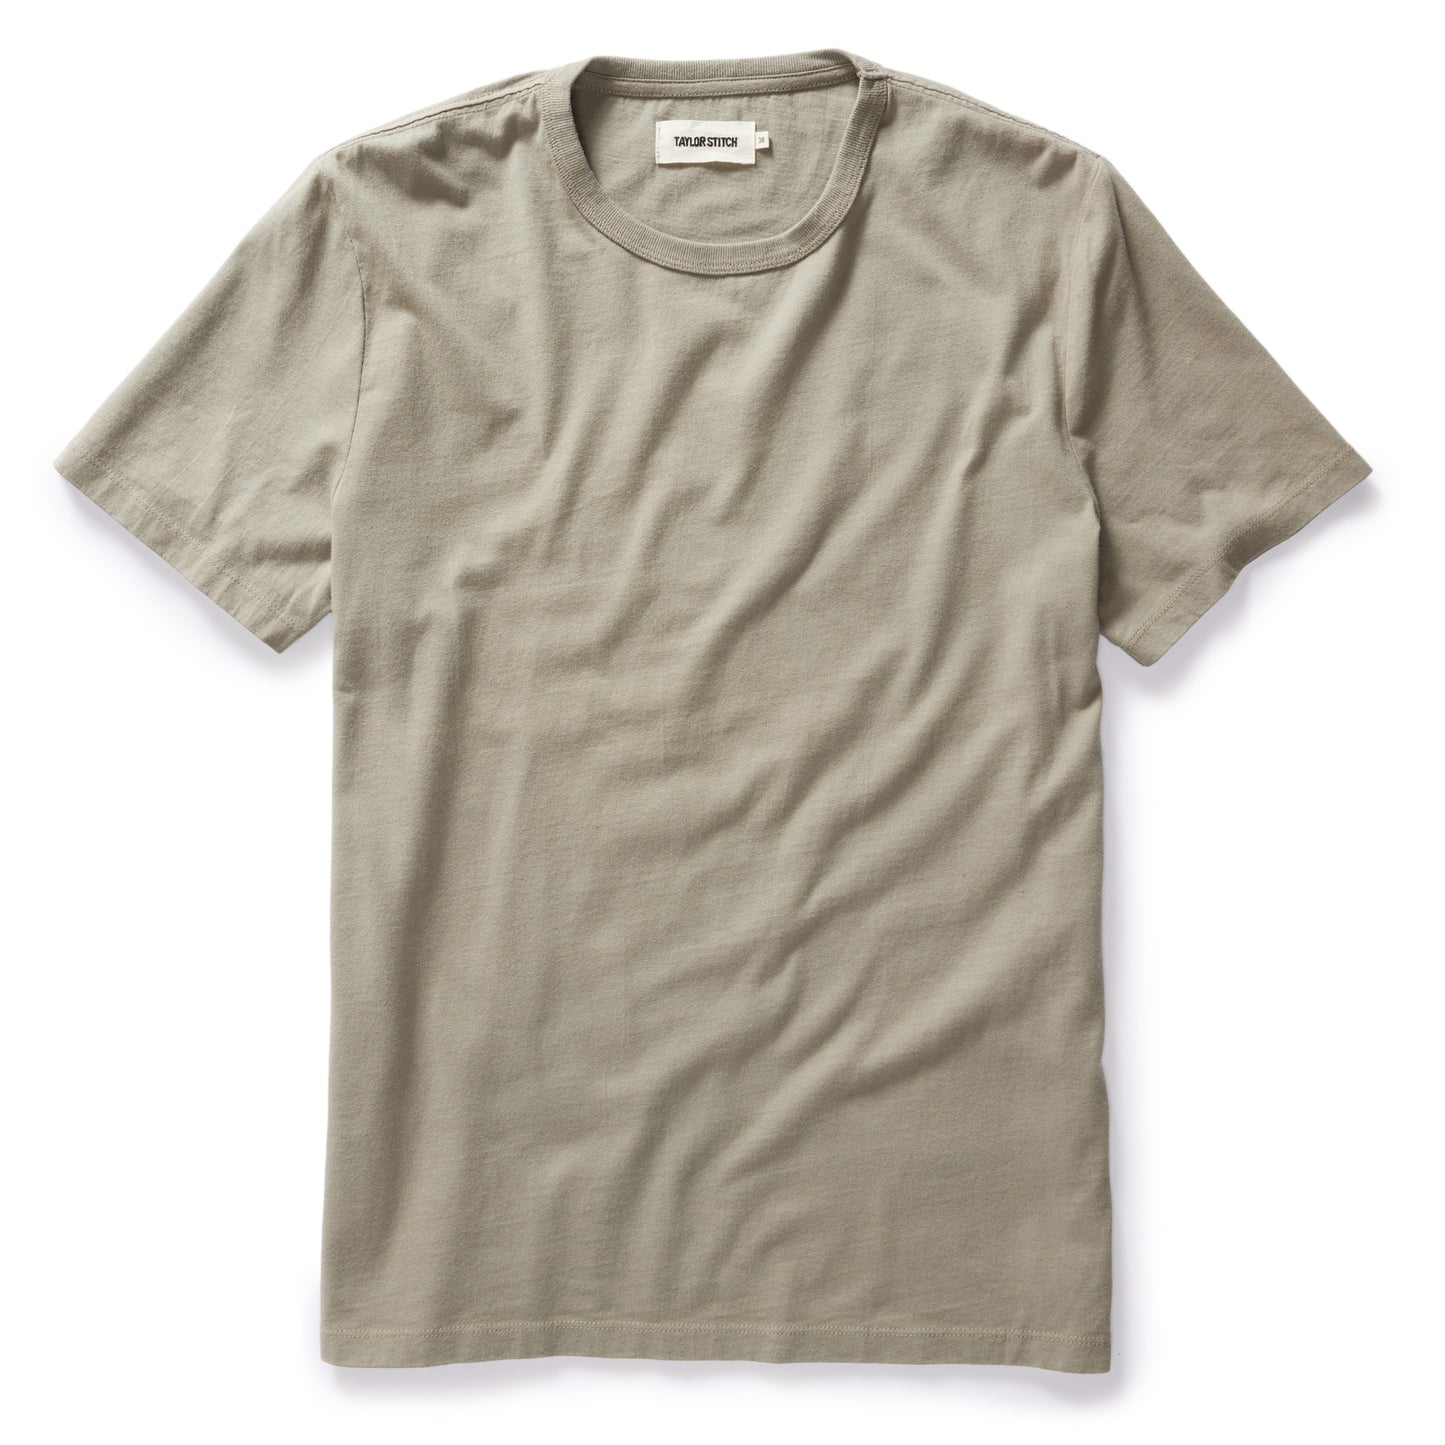 Taylor Stitch - The Organic Cotton Tee in Dried Sage